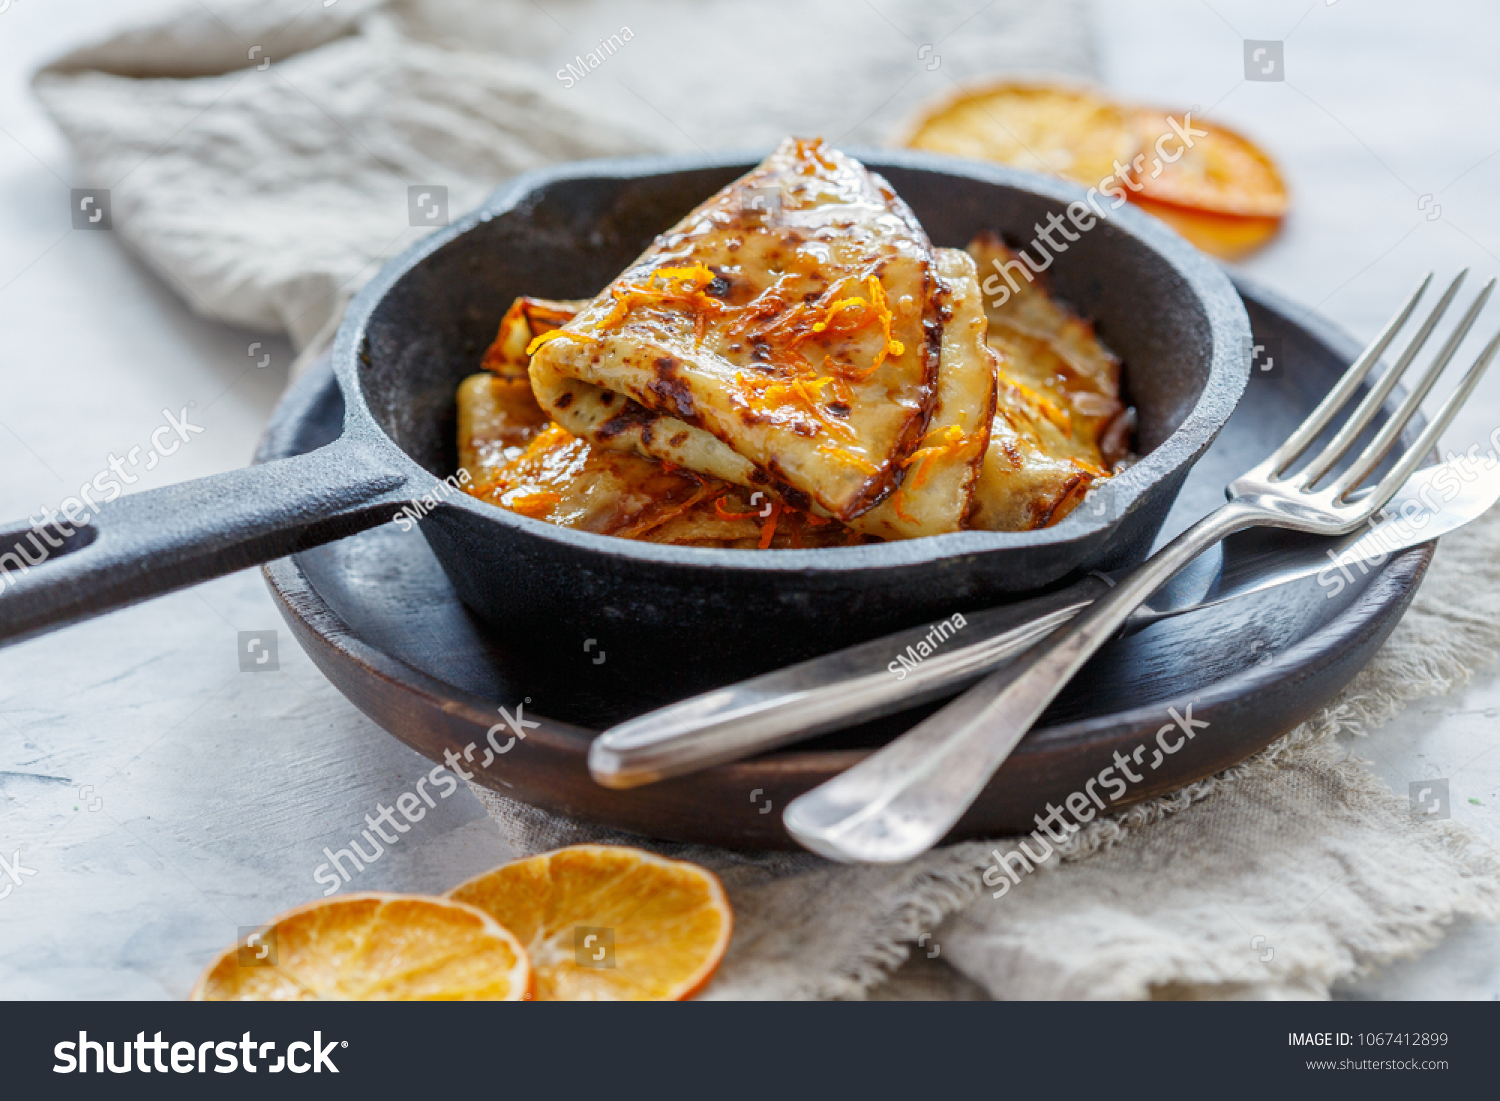 Traditional French crepe Suzette with orange sauce in a cast iron pan. #1067412899